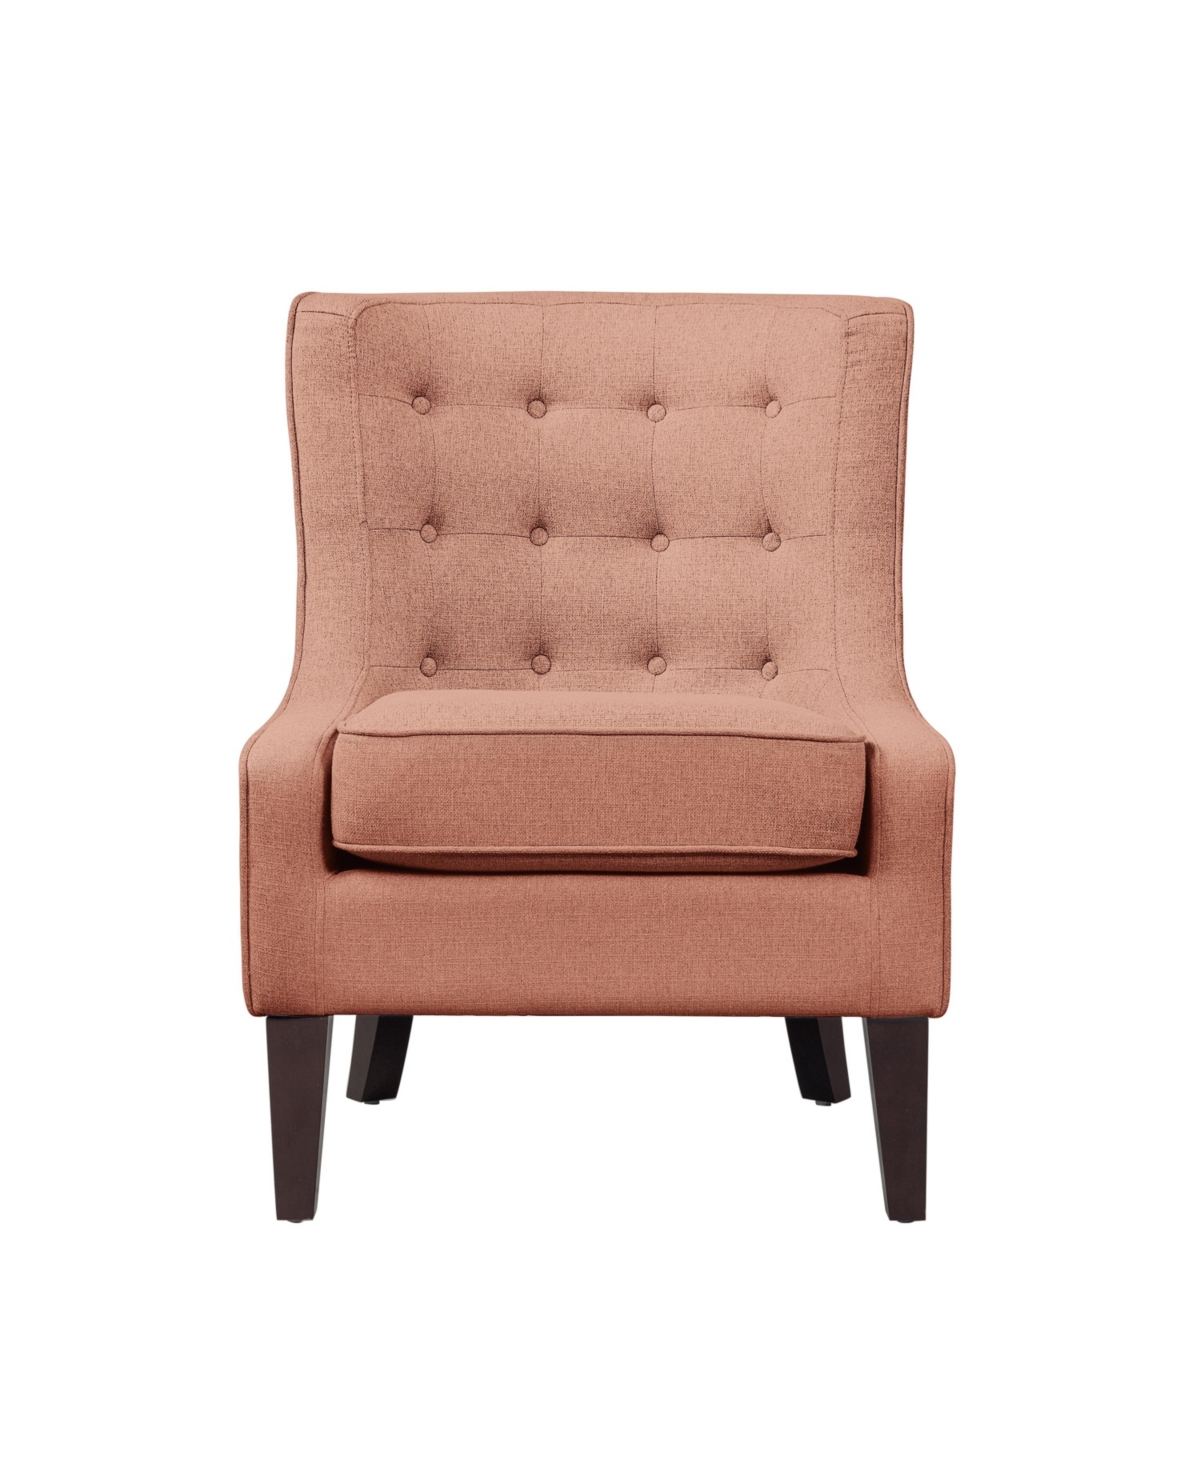 Lifestyle Solutions 36.8" Polyester Iona Accent Chair In Blush